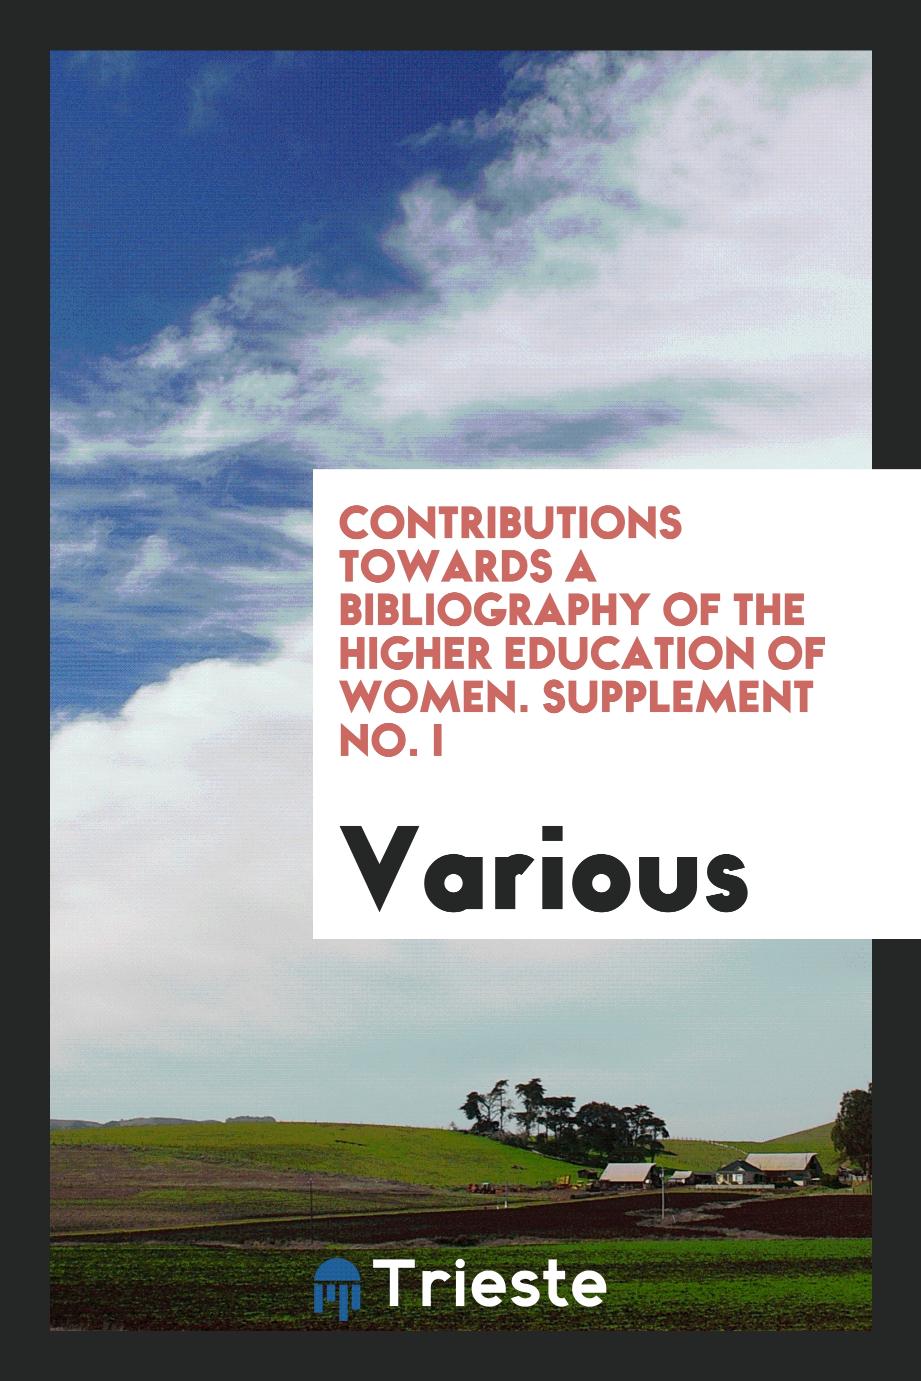 Contributions Towards a Bibliography of the Higher Education of Women. Supplement No. I